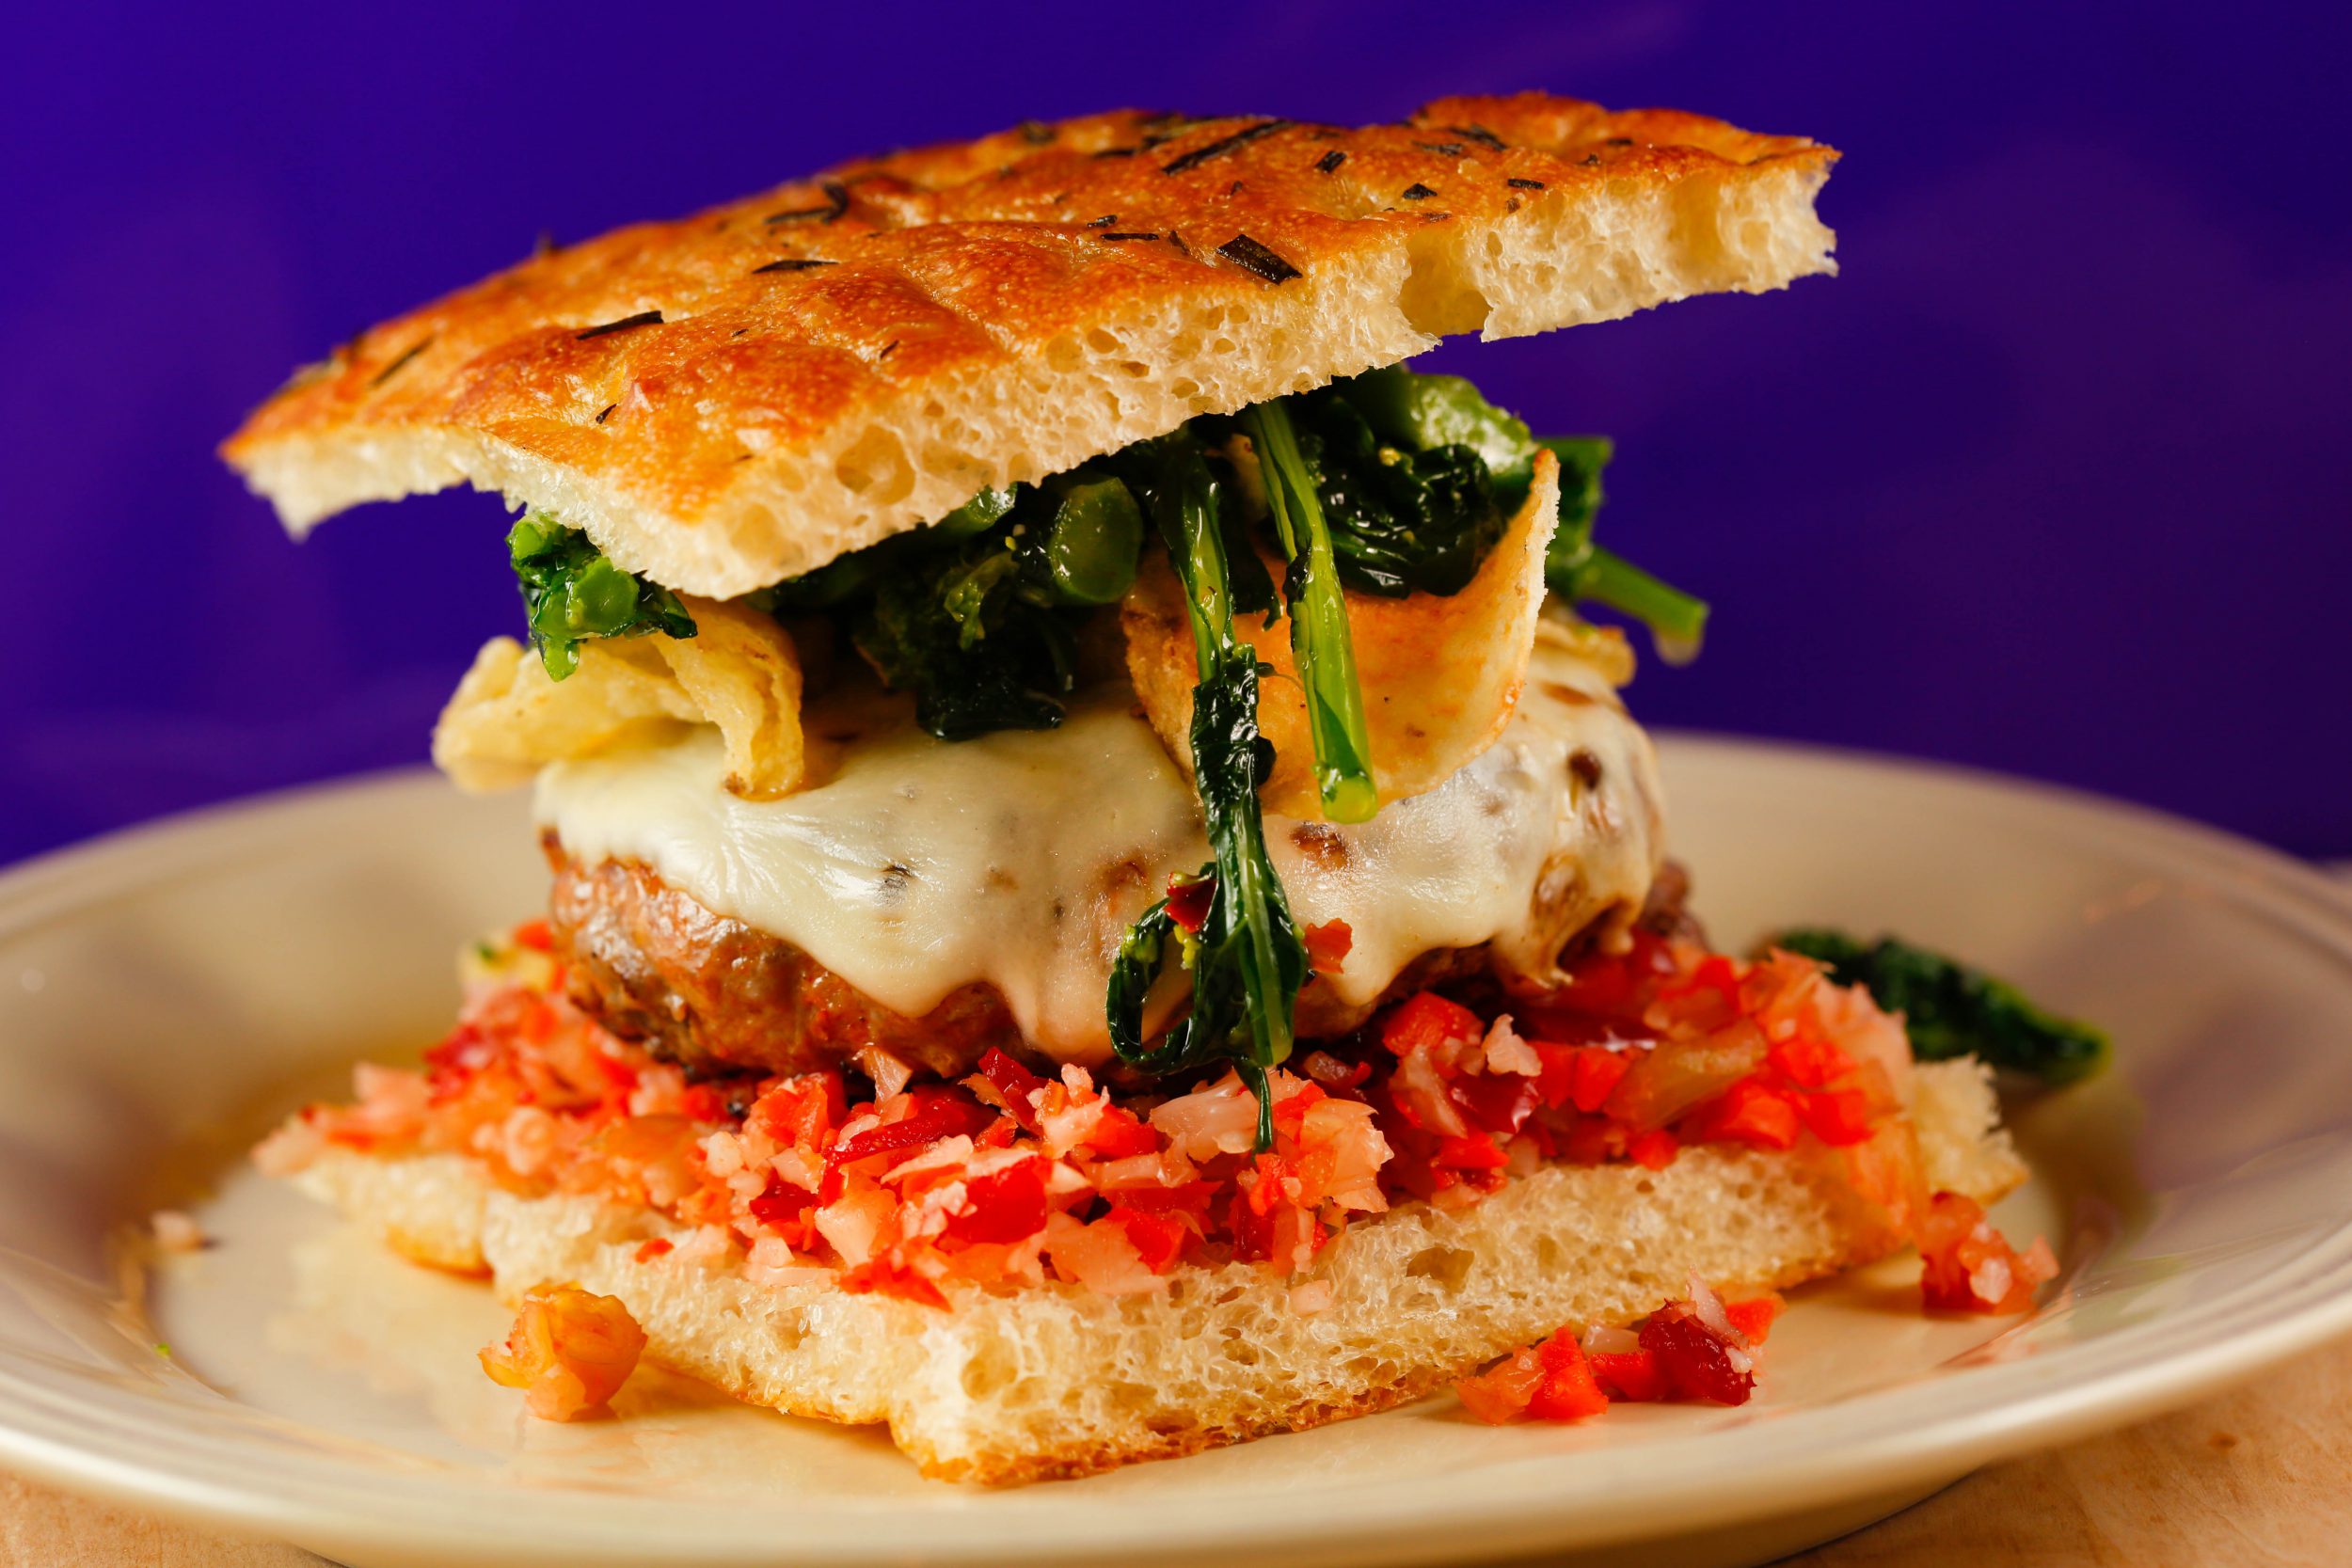 Italian Sausage Burgers with Provolone and Broccoli Rabe